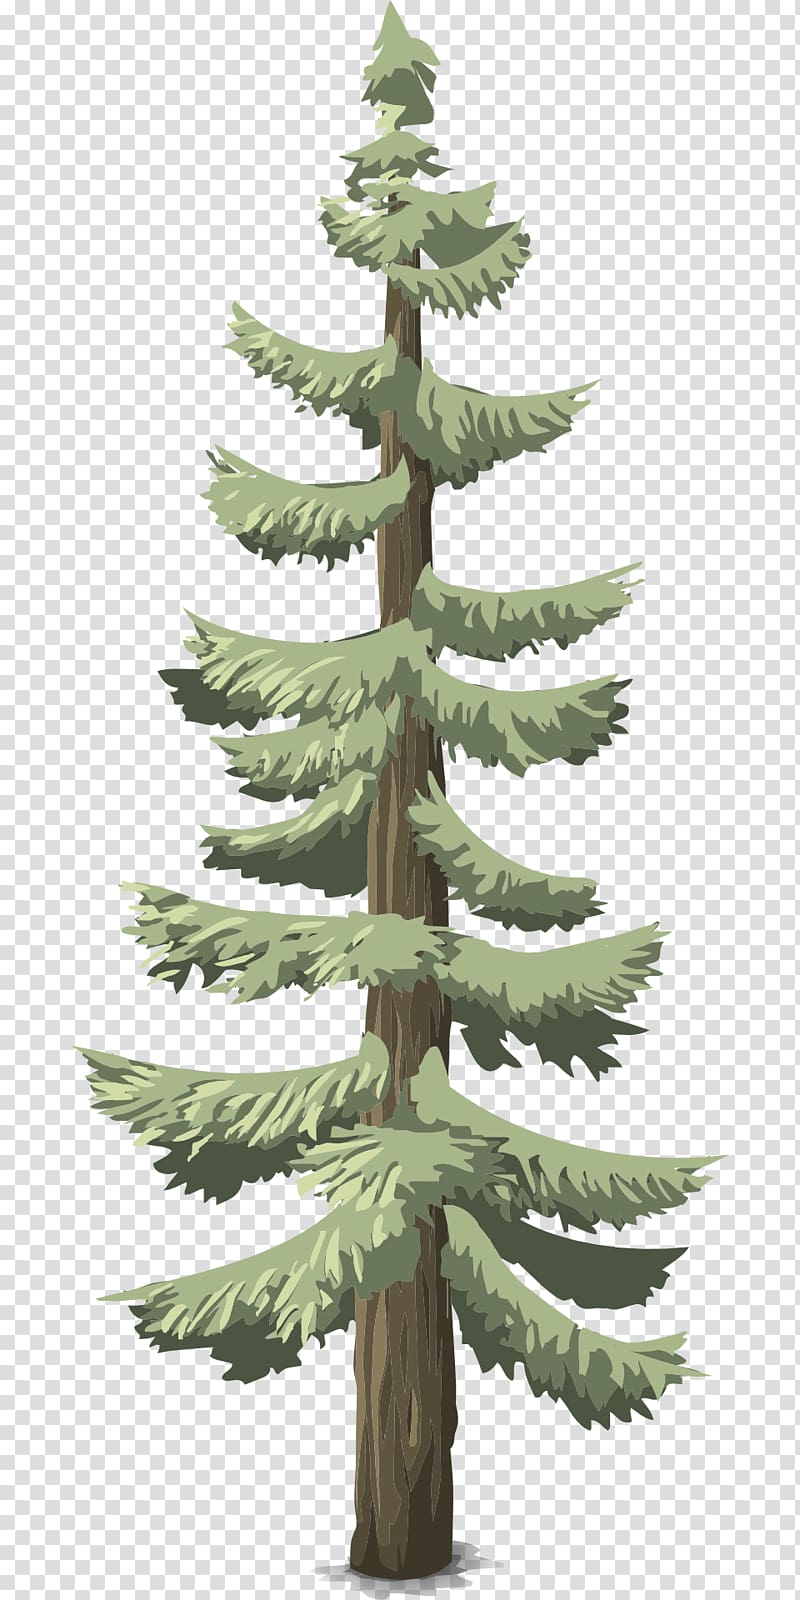 Pine Conifers Tree Conifer cone Evergreen, pine transparent background PNG clipart